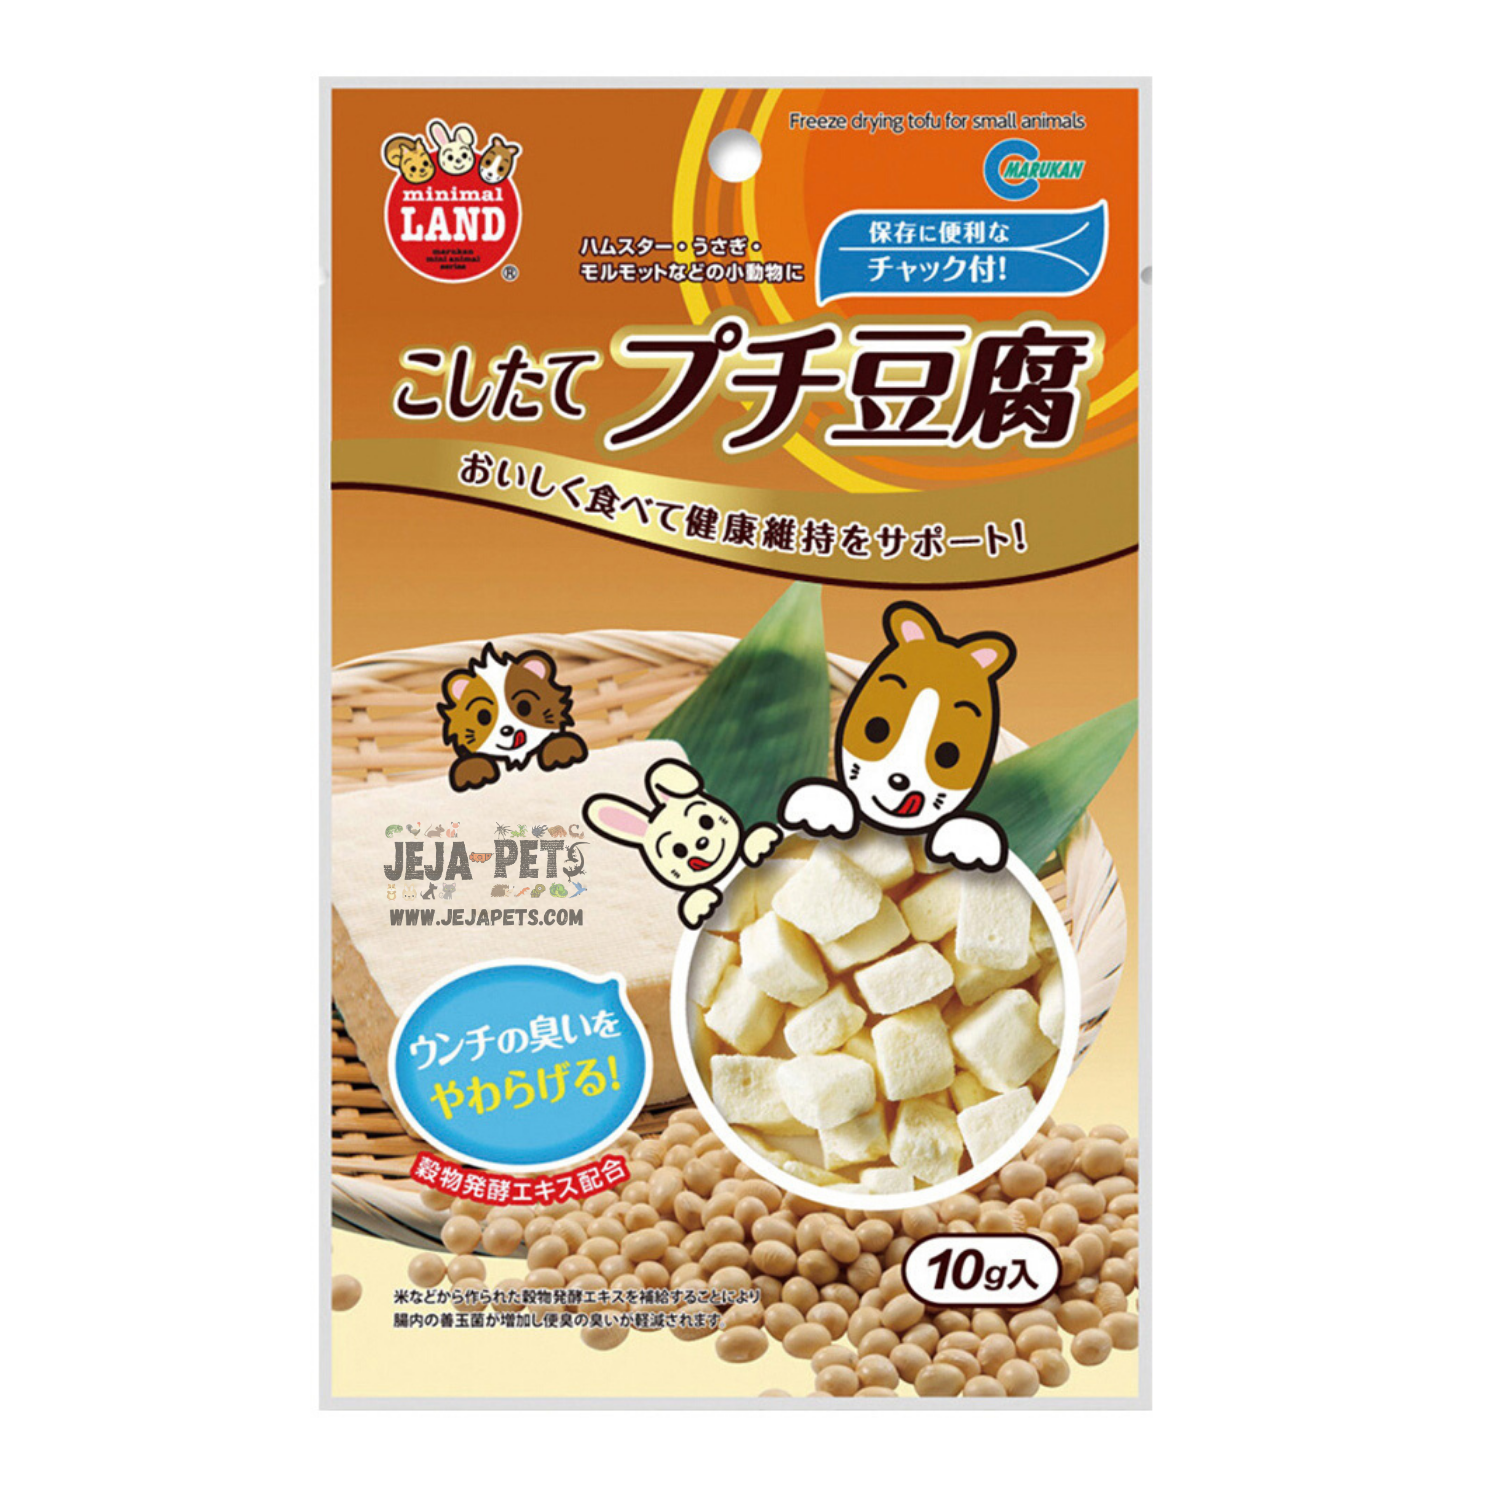 [SAMPLE] Marukan Freeze Dried Tofu for Small Animals - 35 pieces